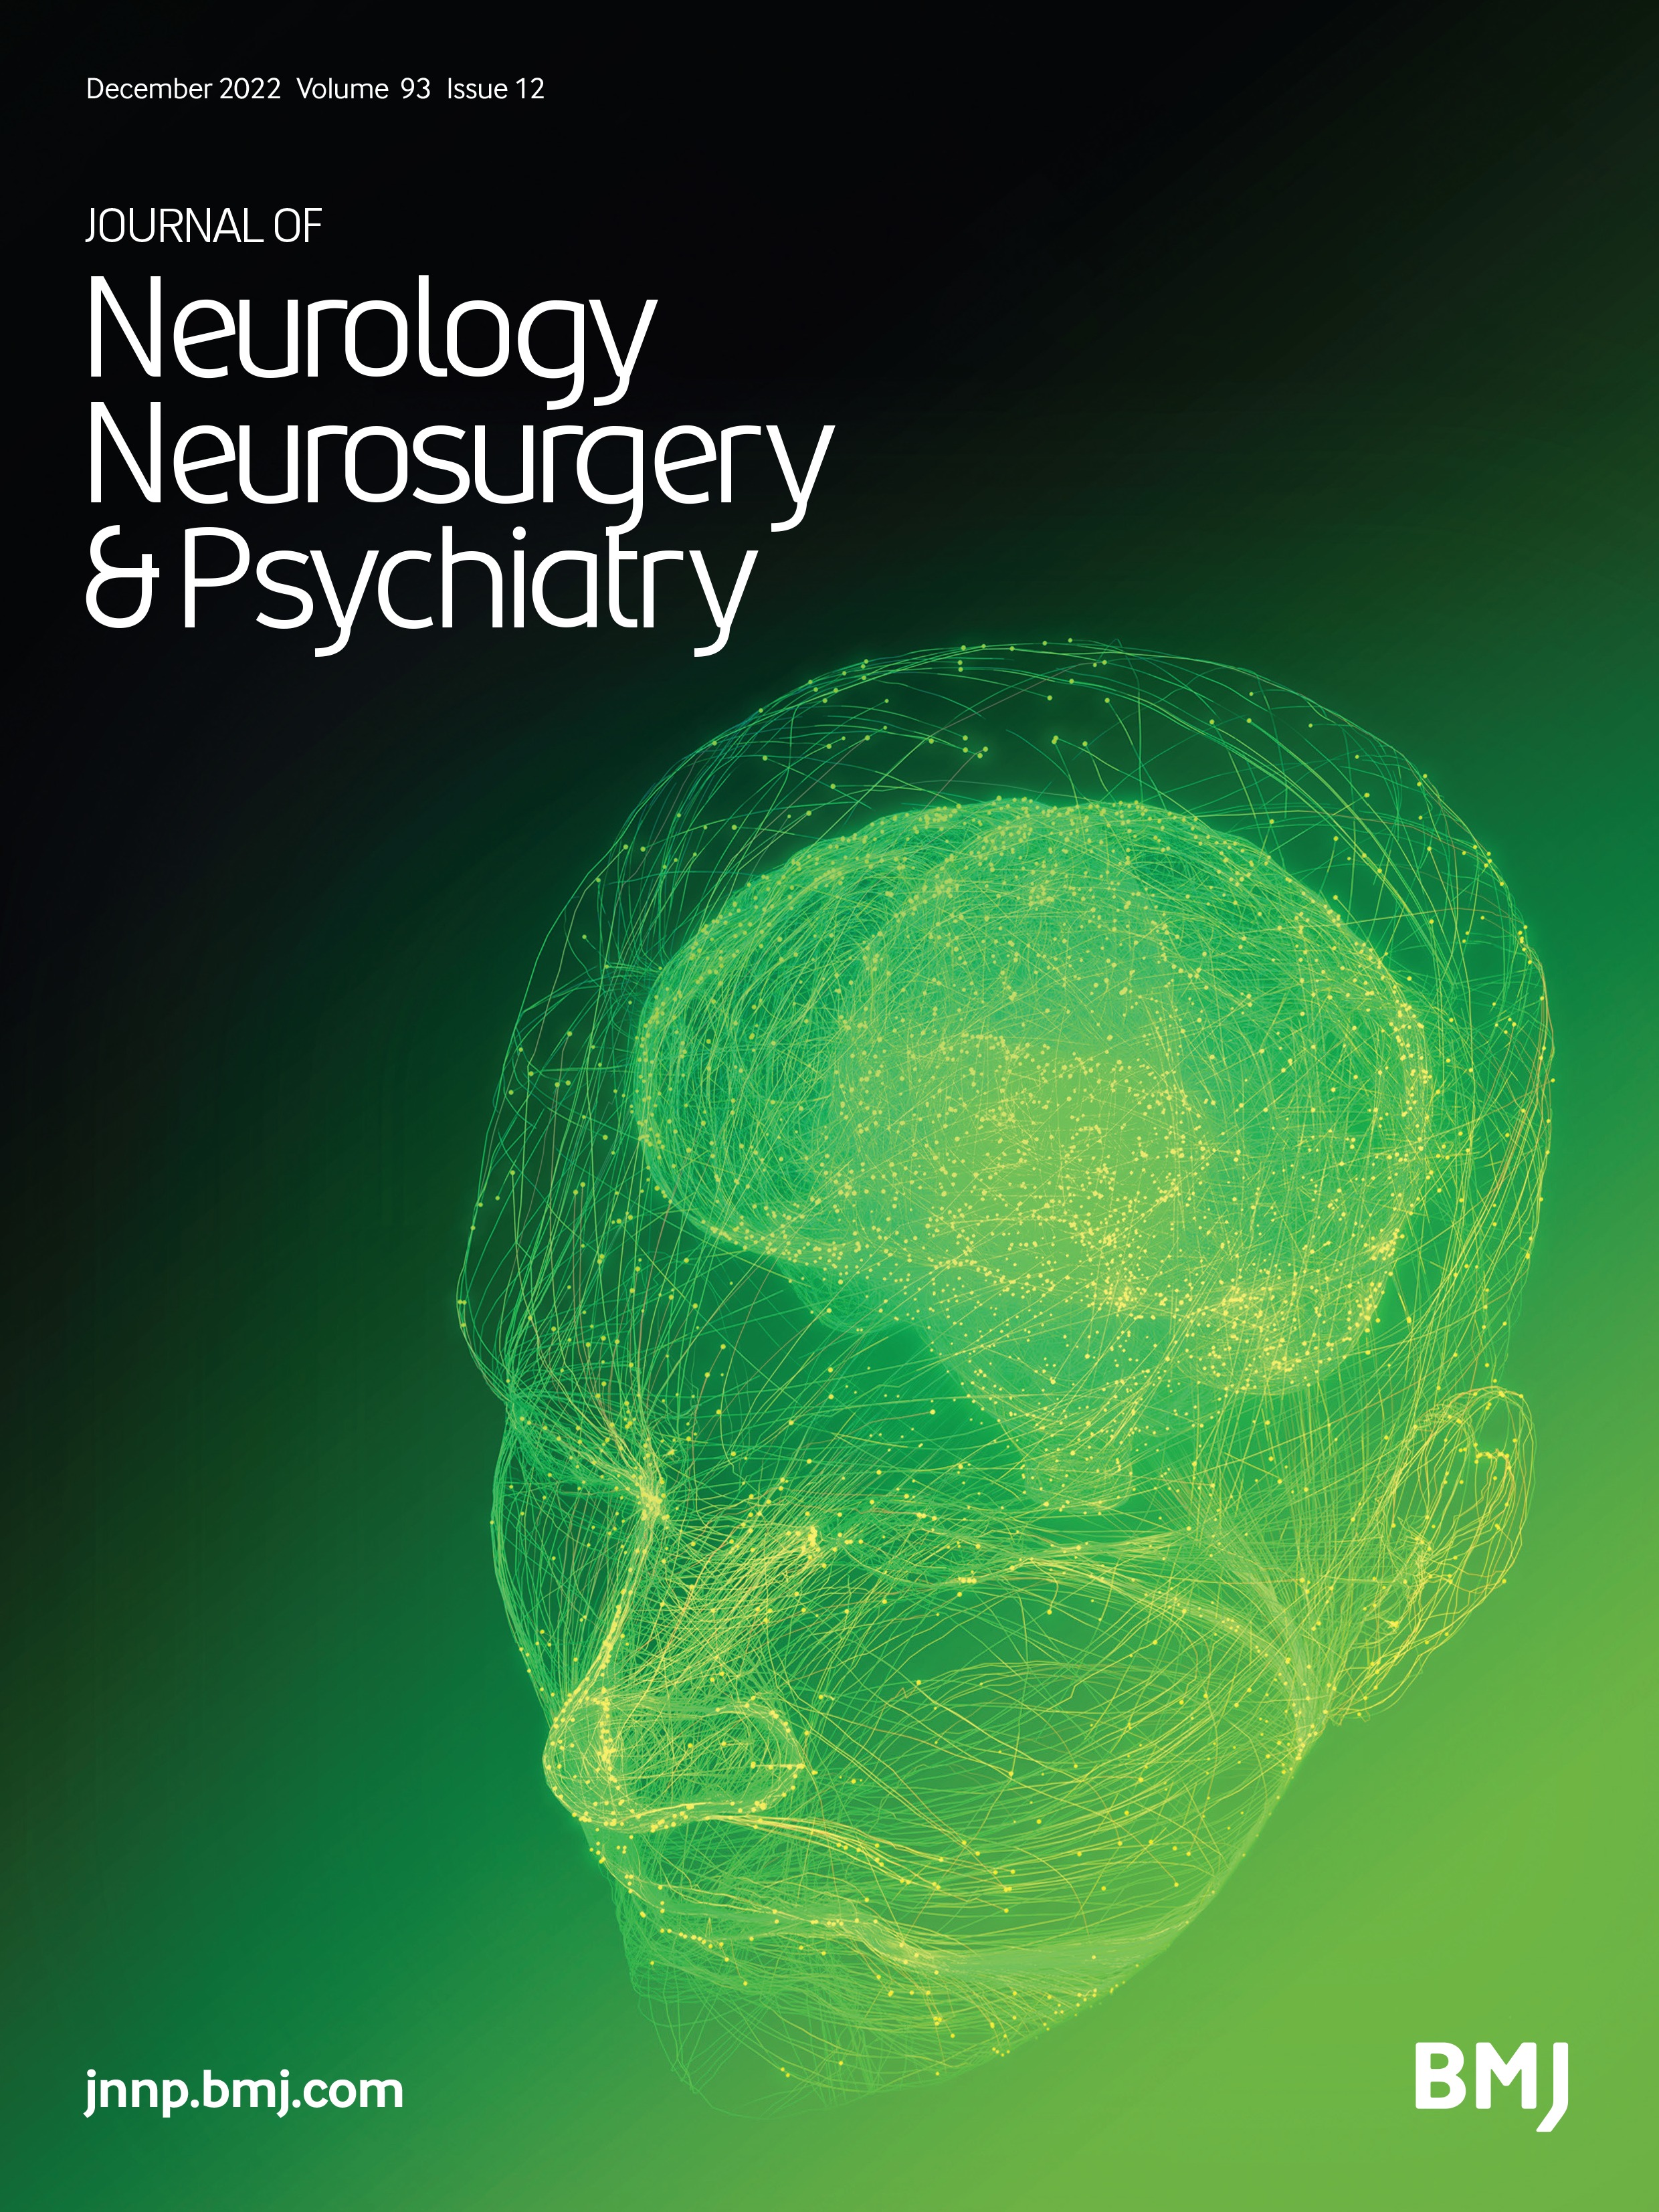 24 Self-awareness of deficits following brain injury: implications for mental capacity and recovery